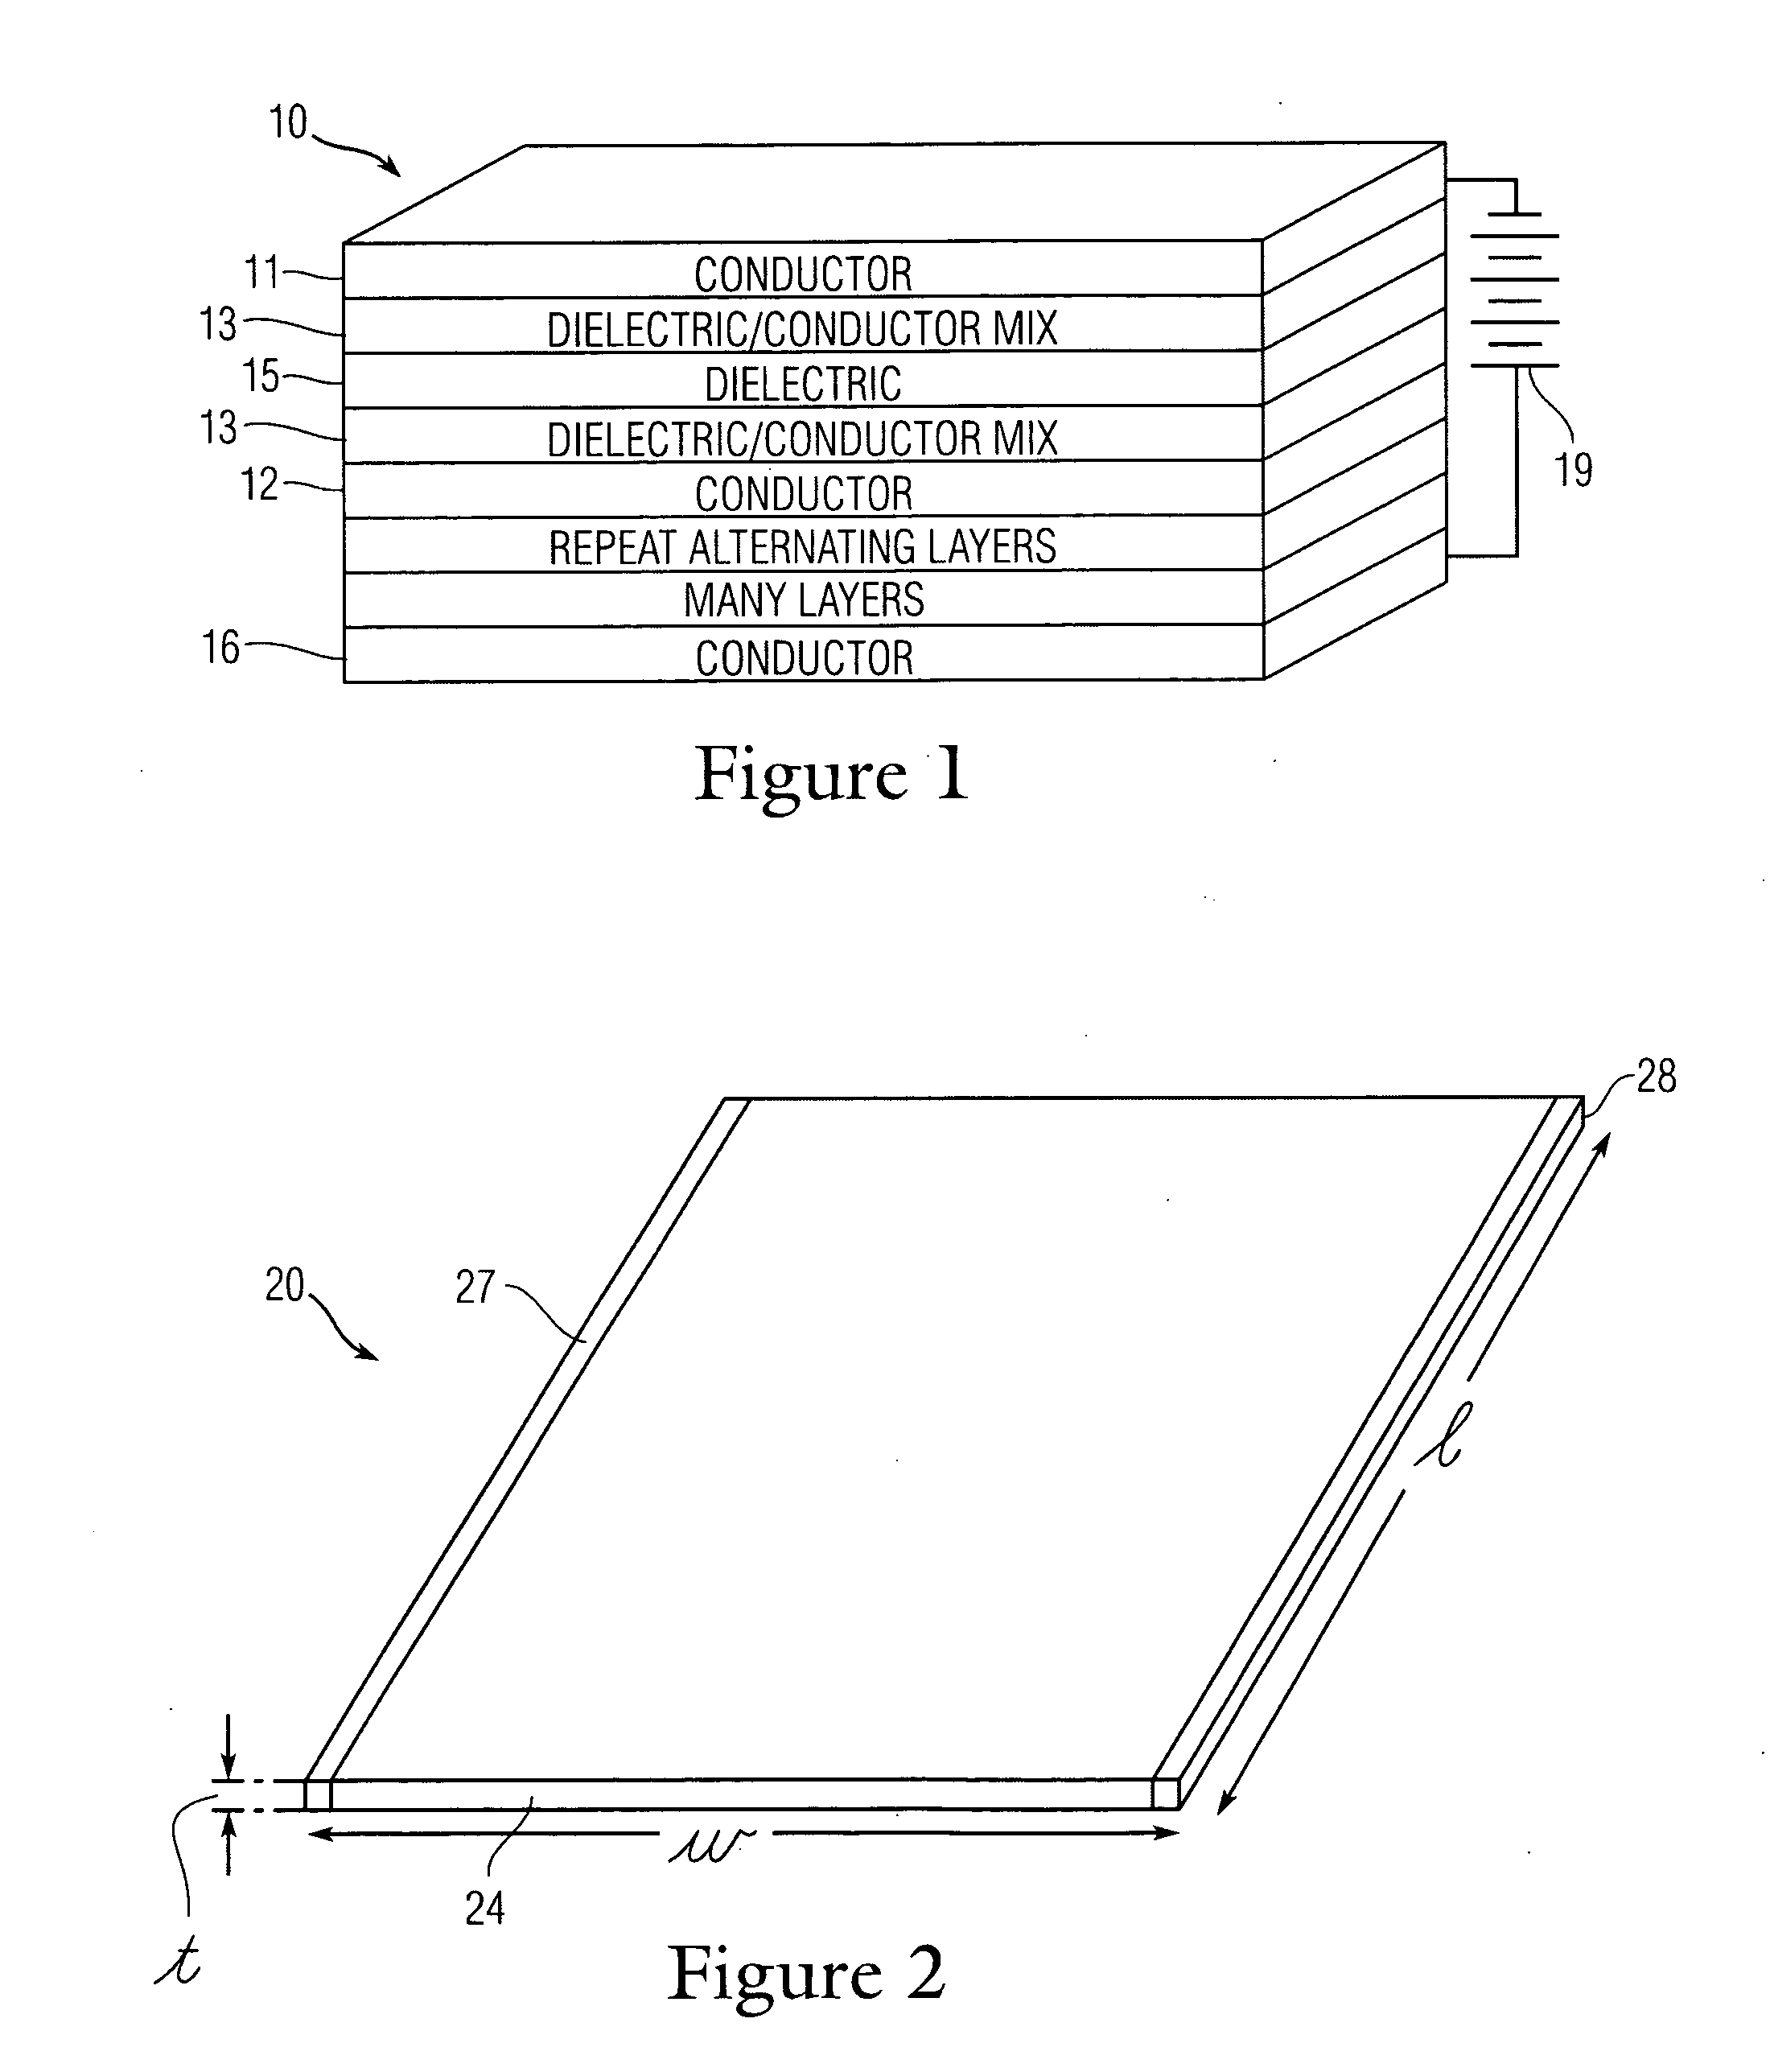 High performance capacitor with high dielectric constant material